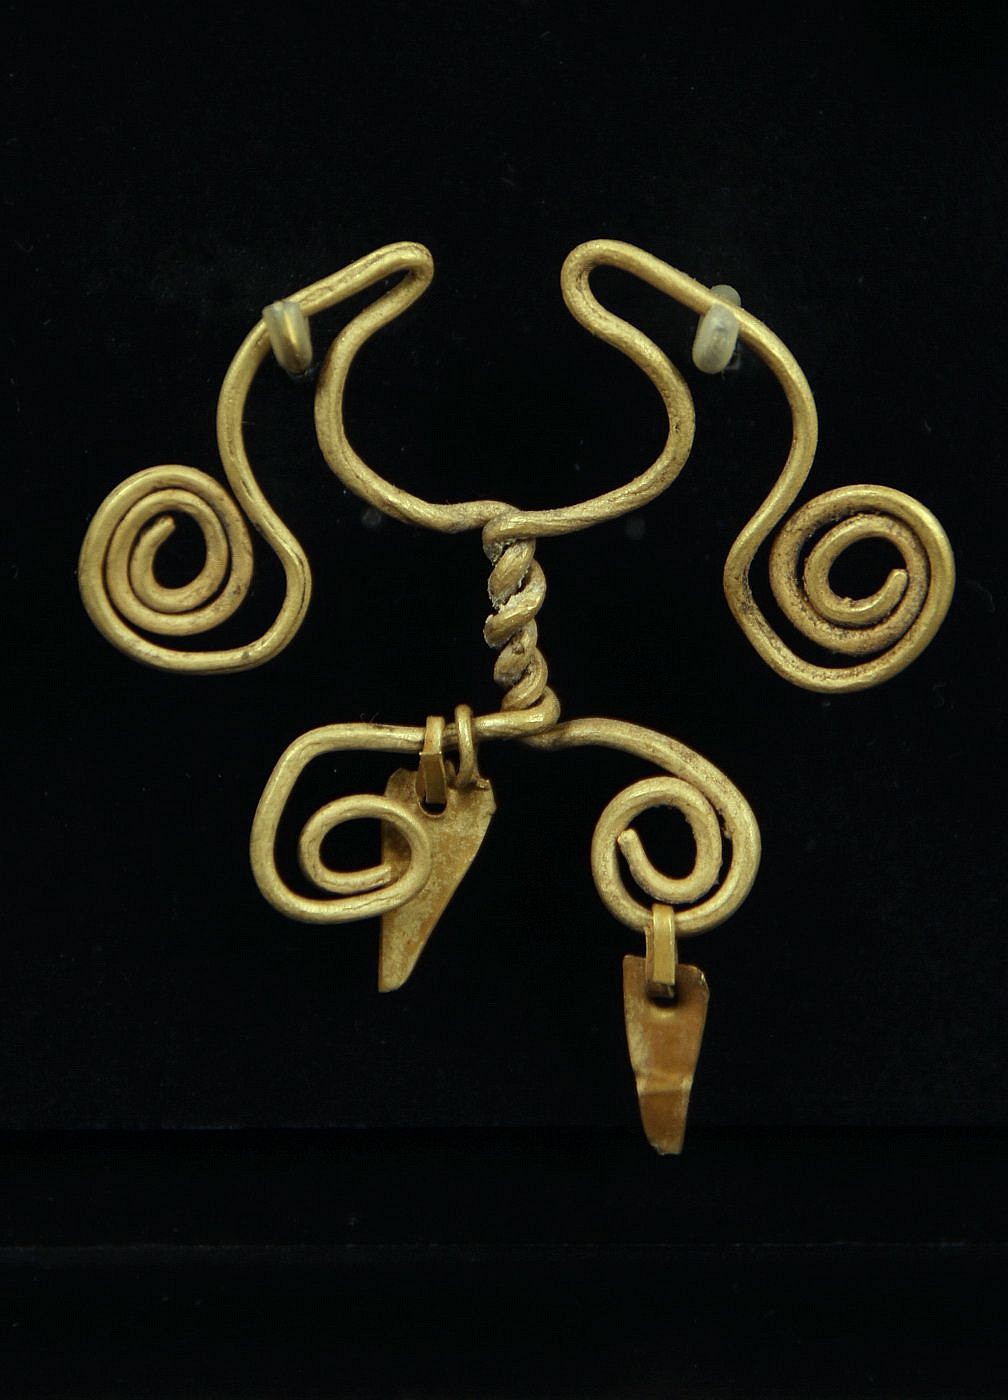 Peru, Chavin Gold Spiral Nose Ring with Two Twisted Wires and Two Dangles
This wire nose ring was made of one hammered sheet of gold, folded on itself, and cut.   The ornament was hammered and coiled with the original suspended dangles.

Media: Metal
Dimensions: Height:1 1/4"   Weight: 4.8 grams
$2,100
94222